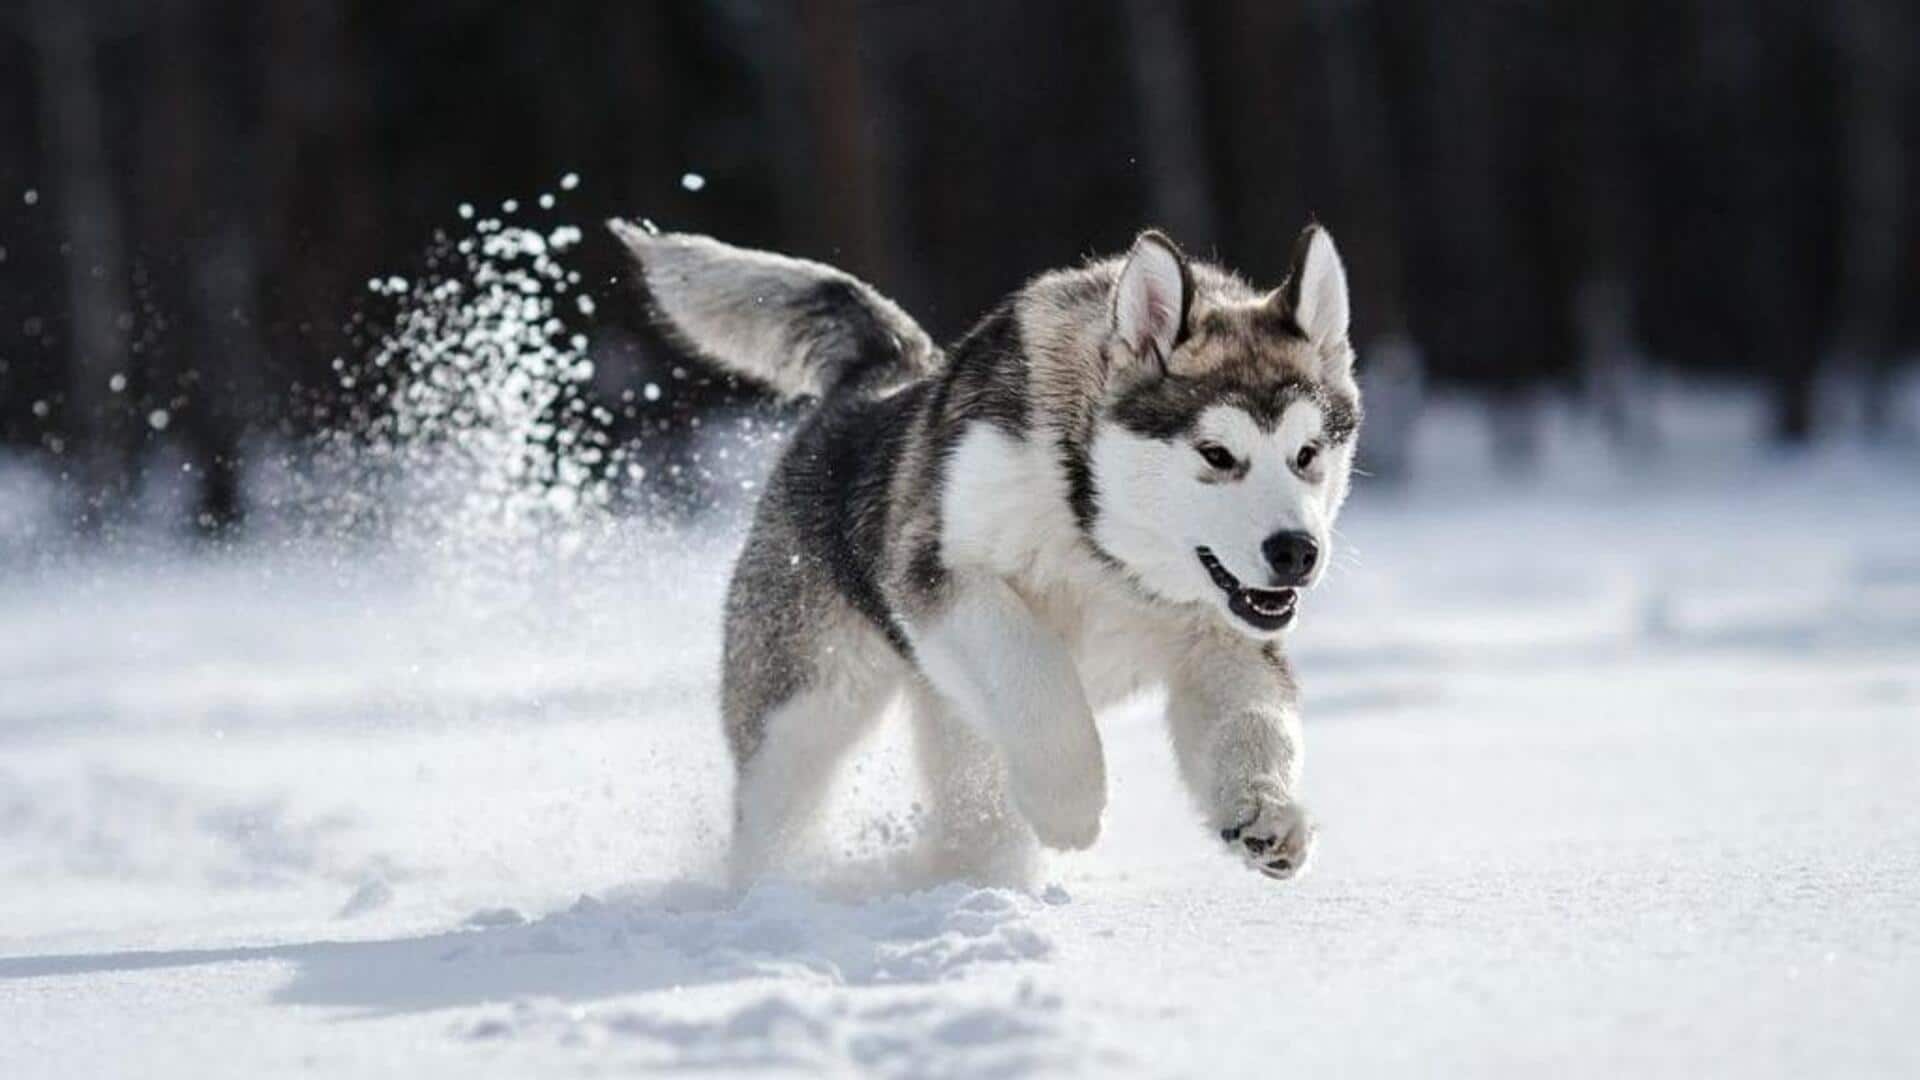 Siberian Husky care guide: Follow these tips for their well-being